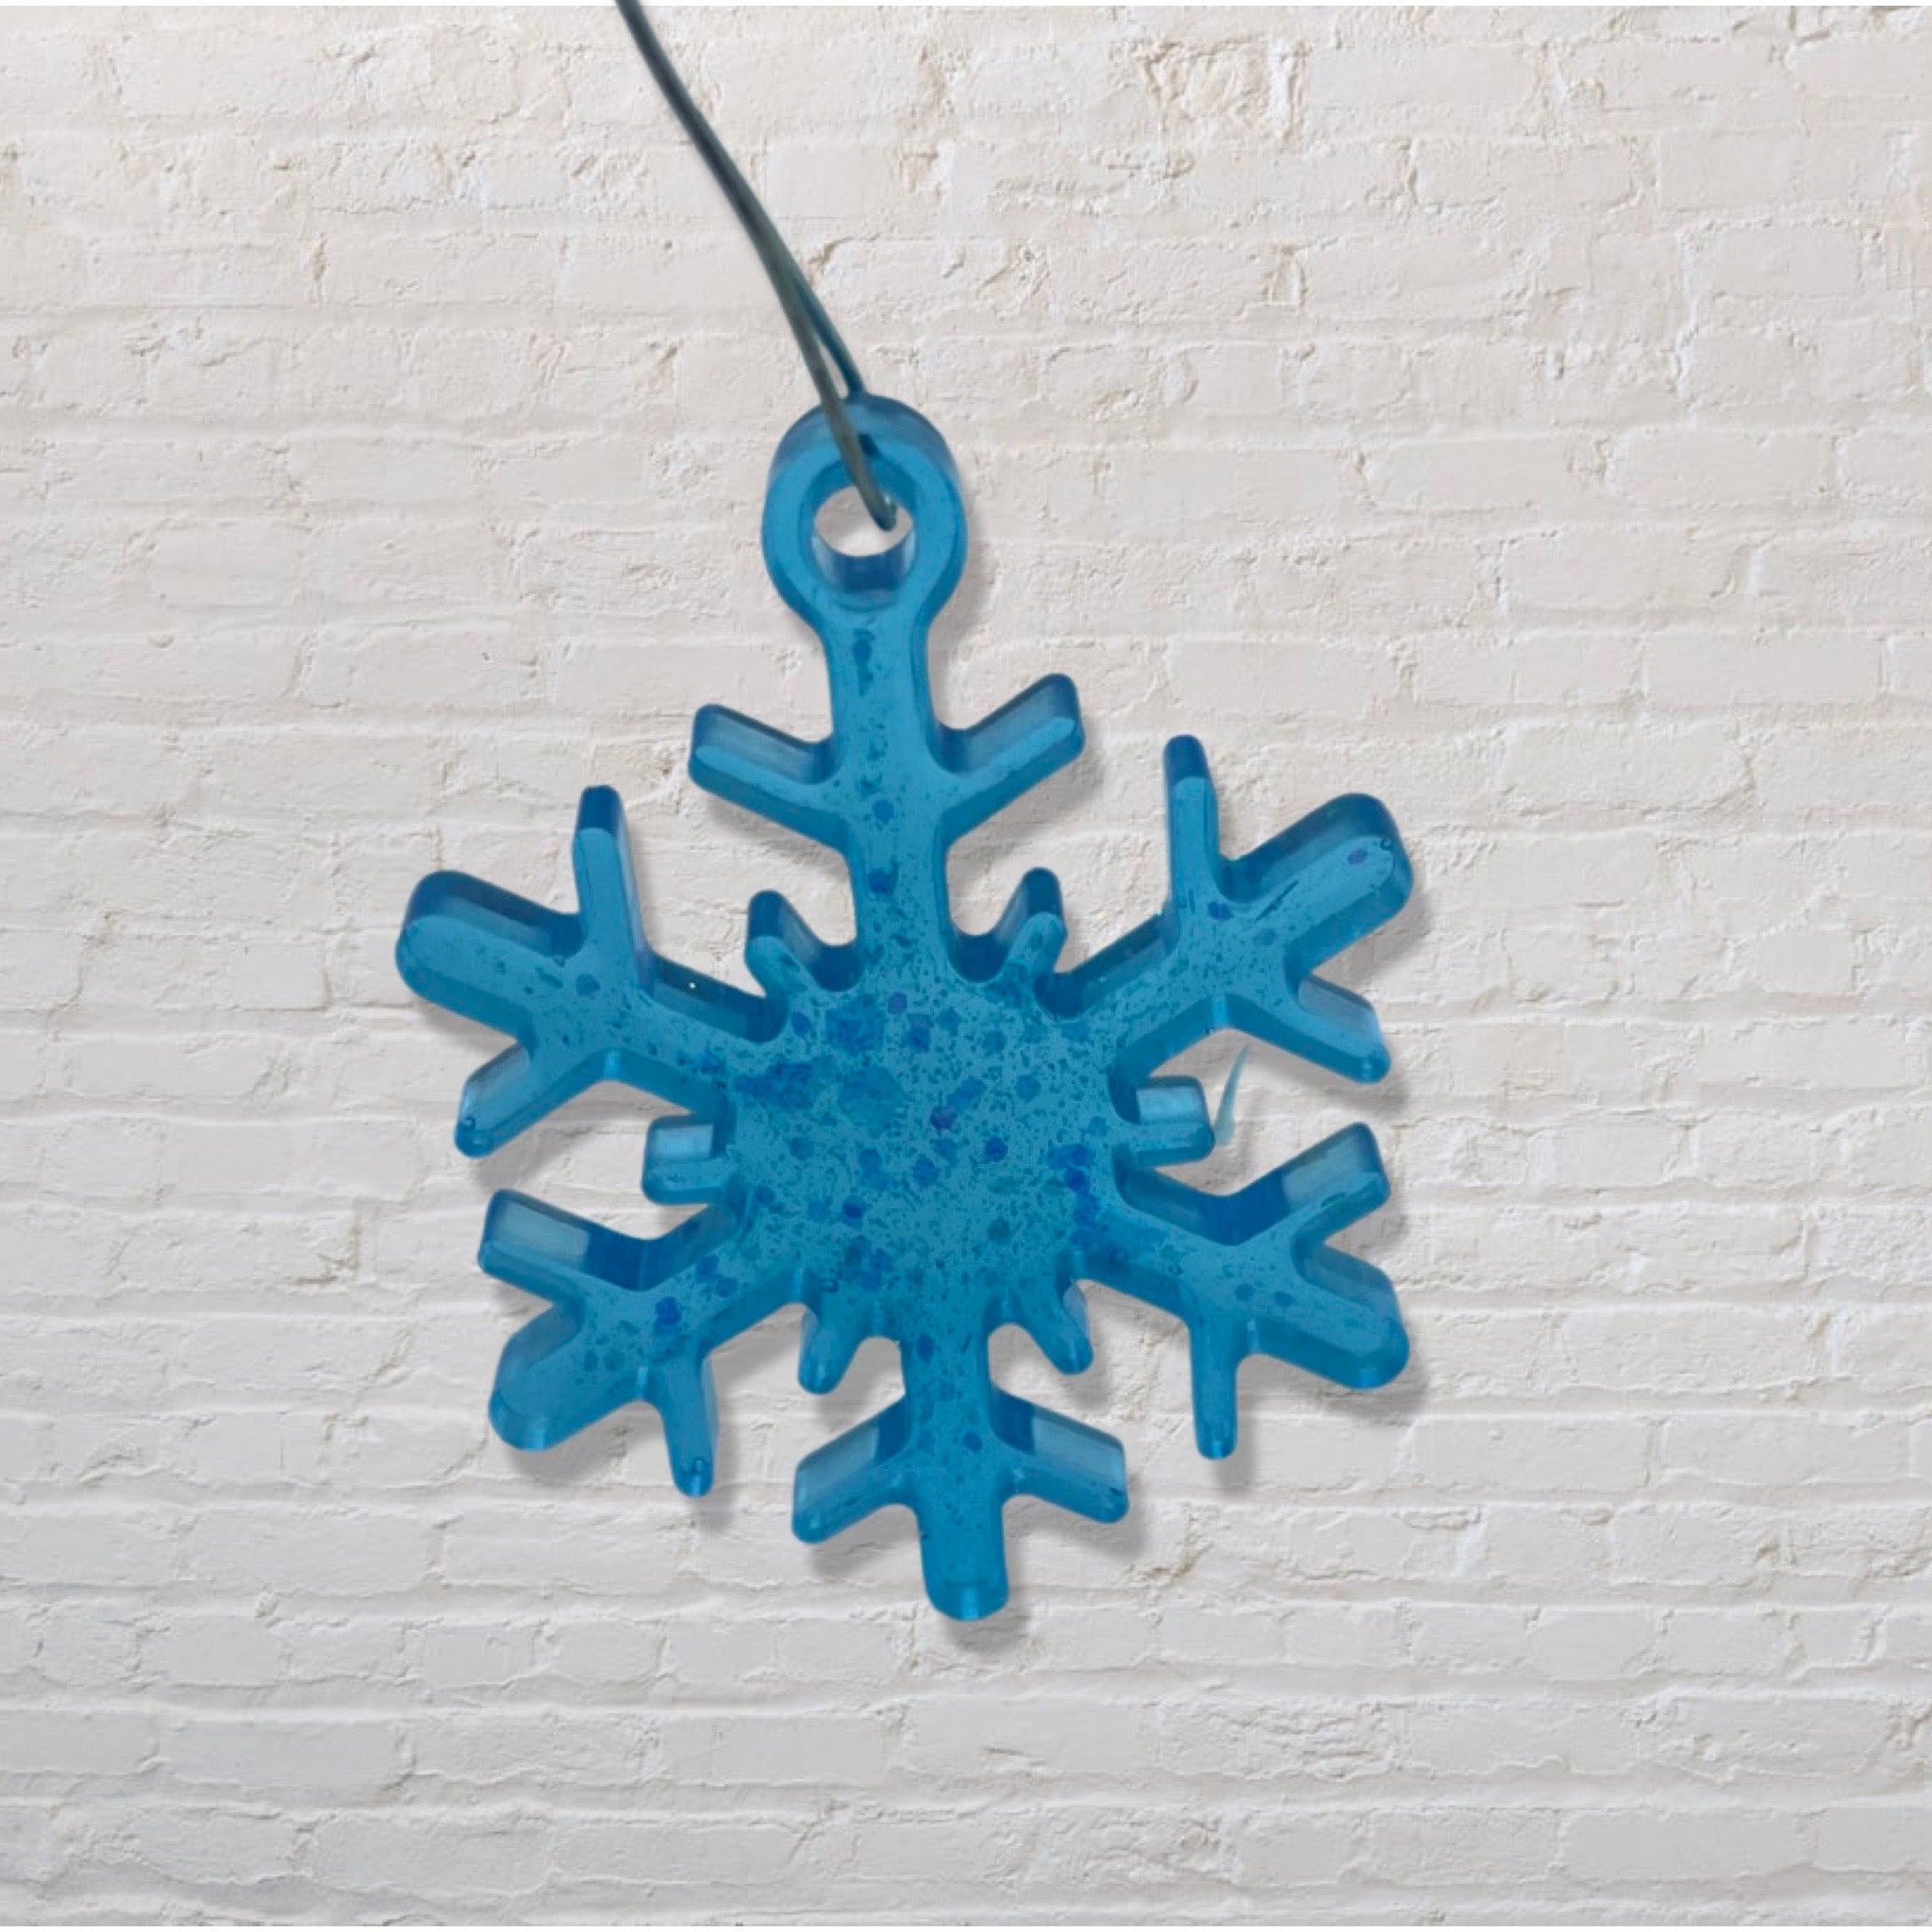 By The Kids -- Resin Snowflake